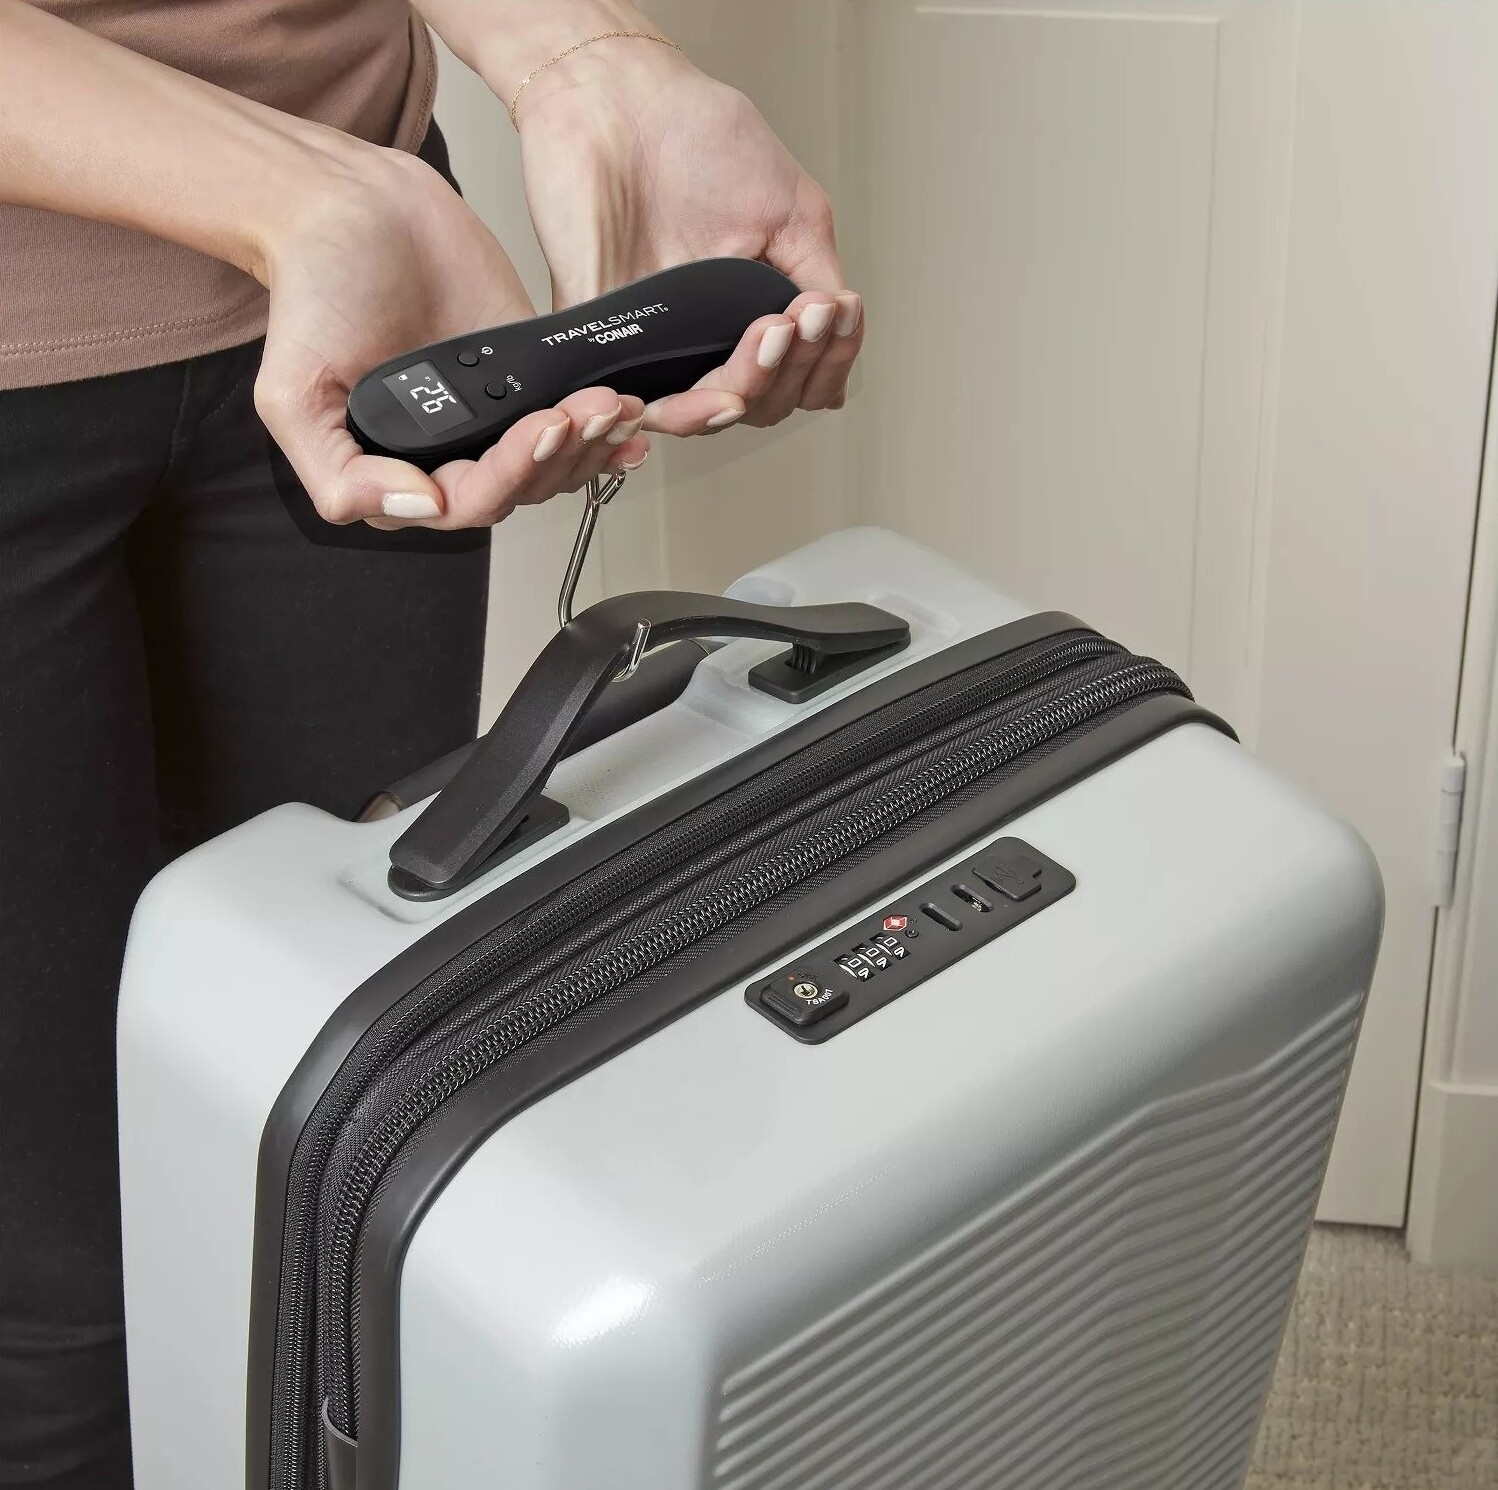 Person using a digital luggage scale to weigh a carry-on suitcase